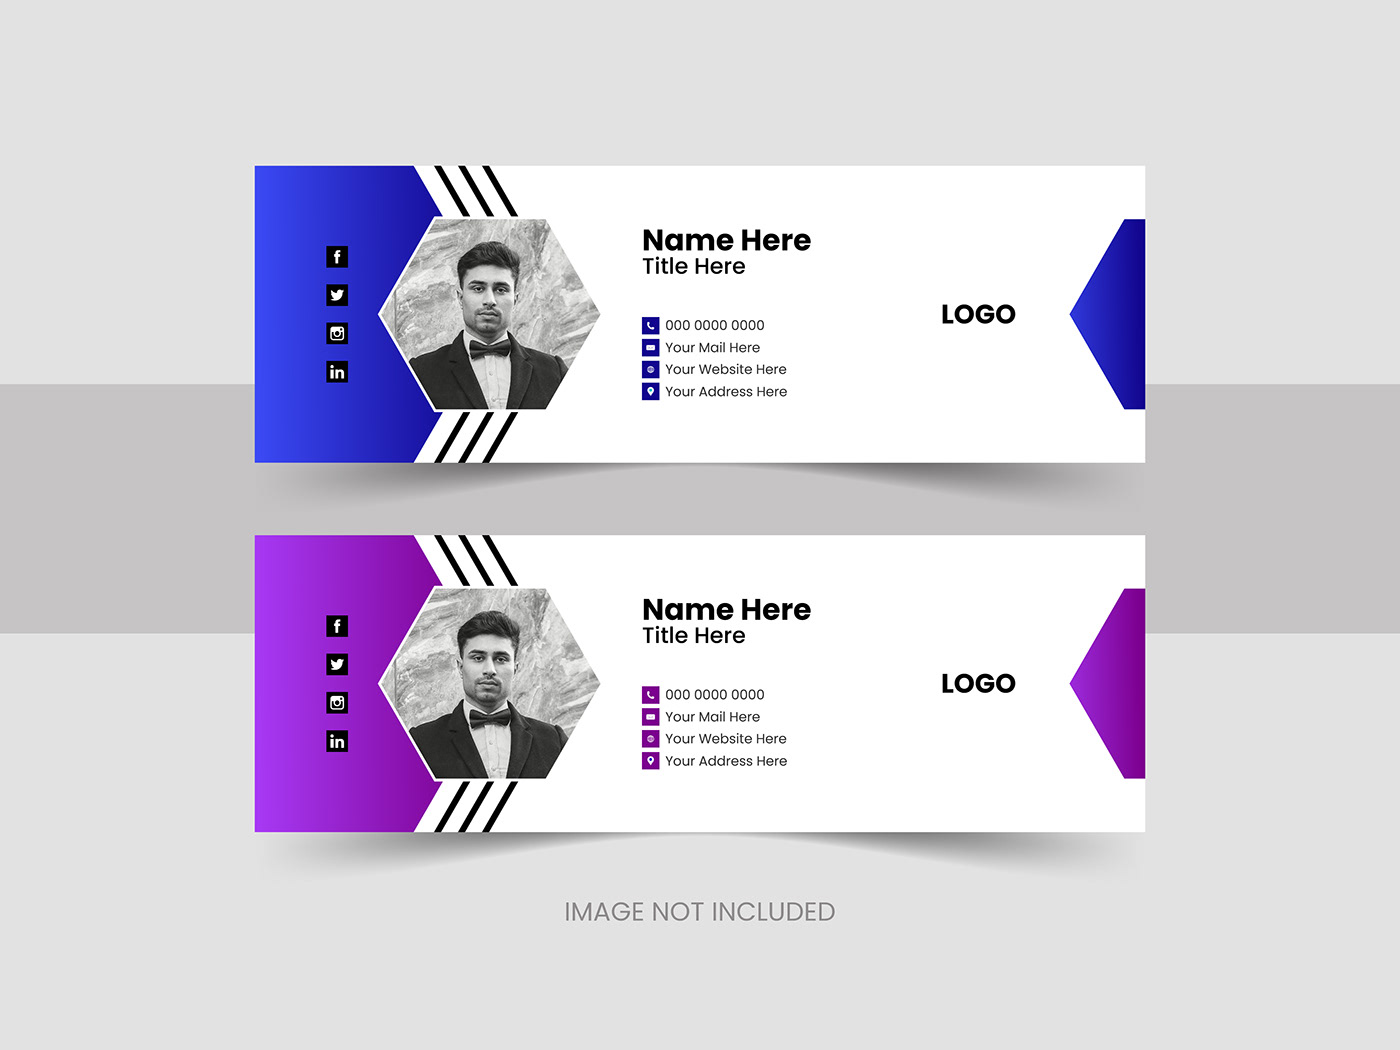 Email signature business Web design template vector banner Layout creative